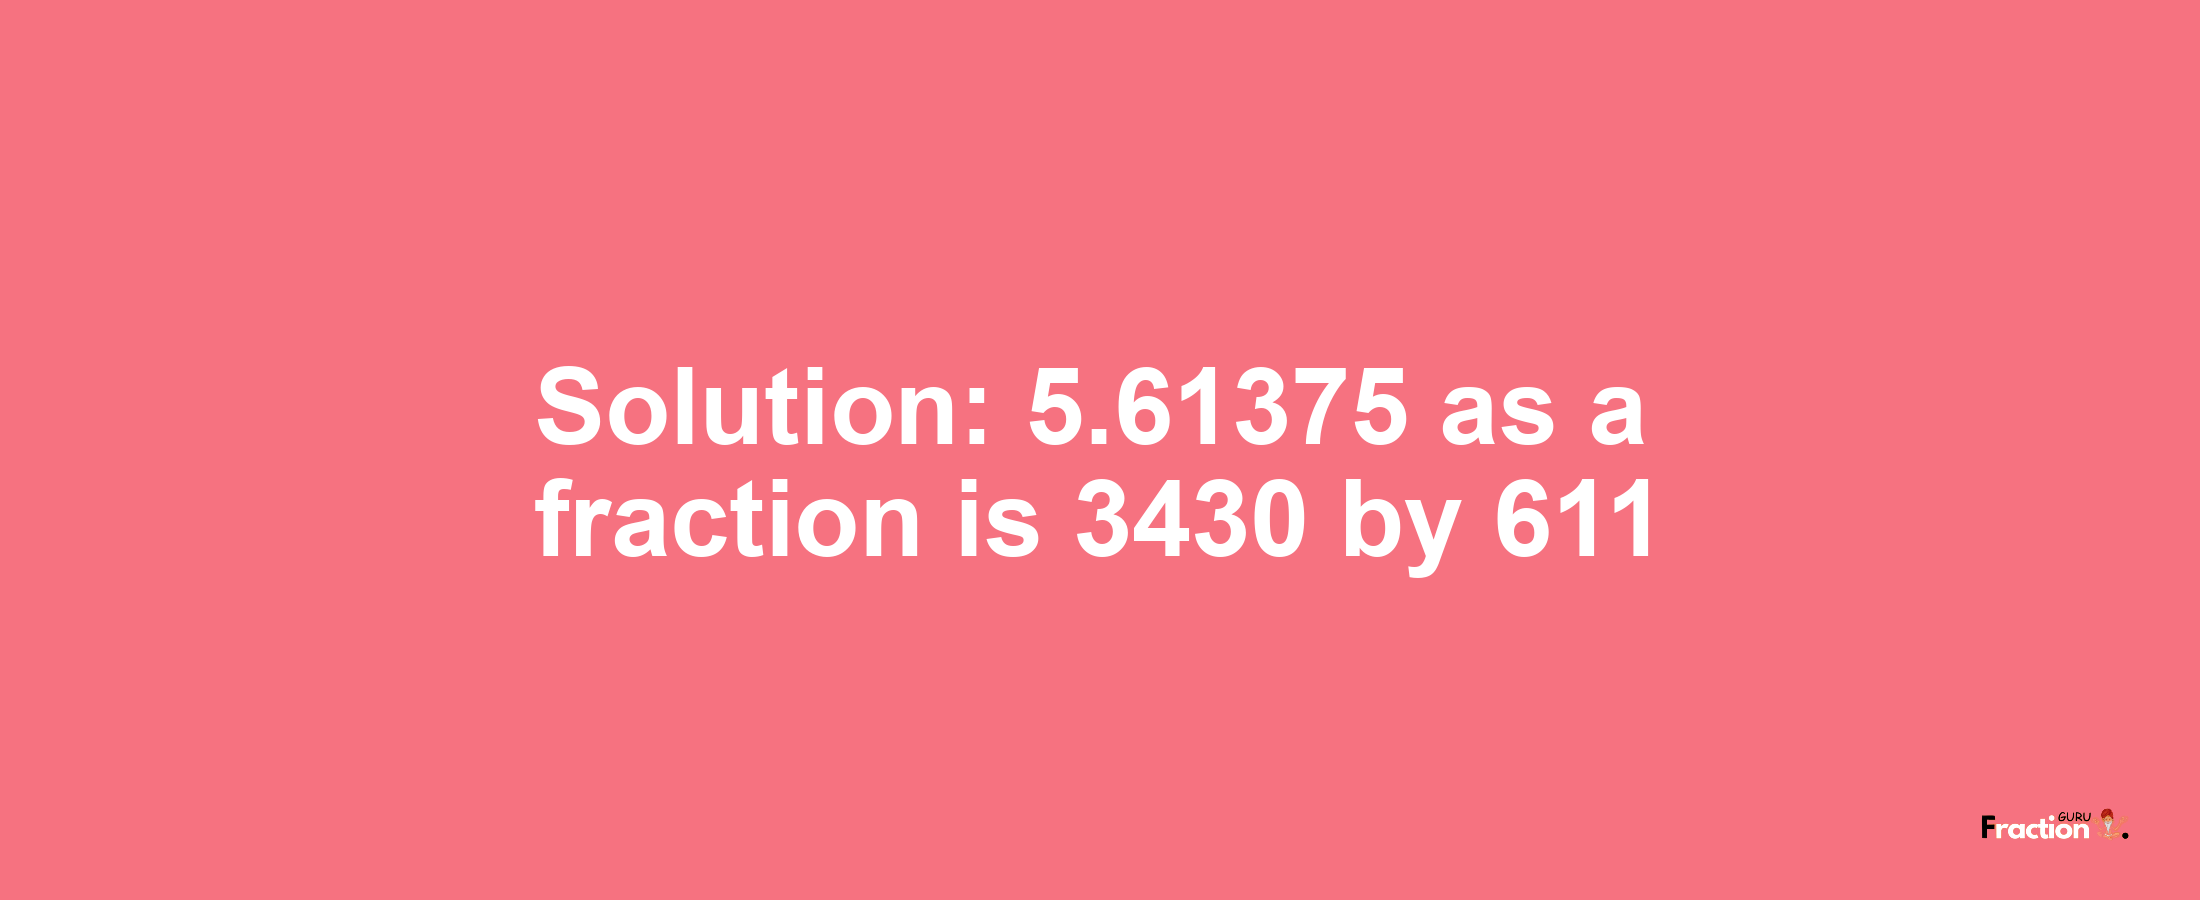 Solution:5.61375 as a fraction is 3430/611